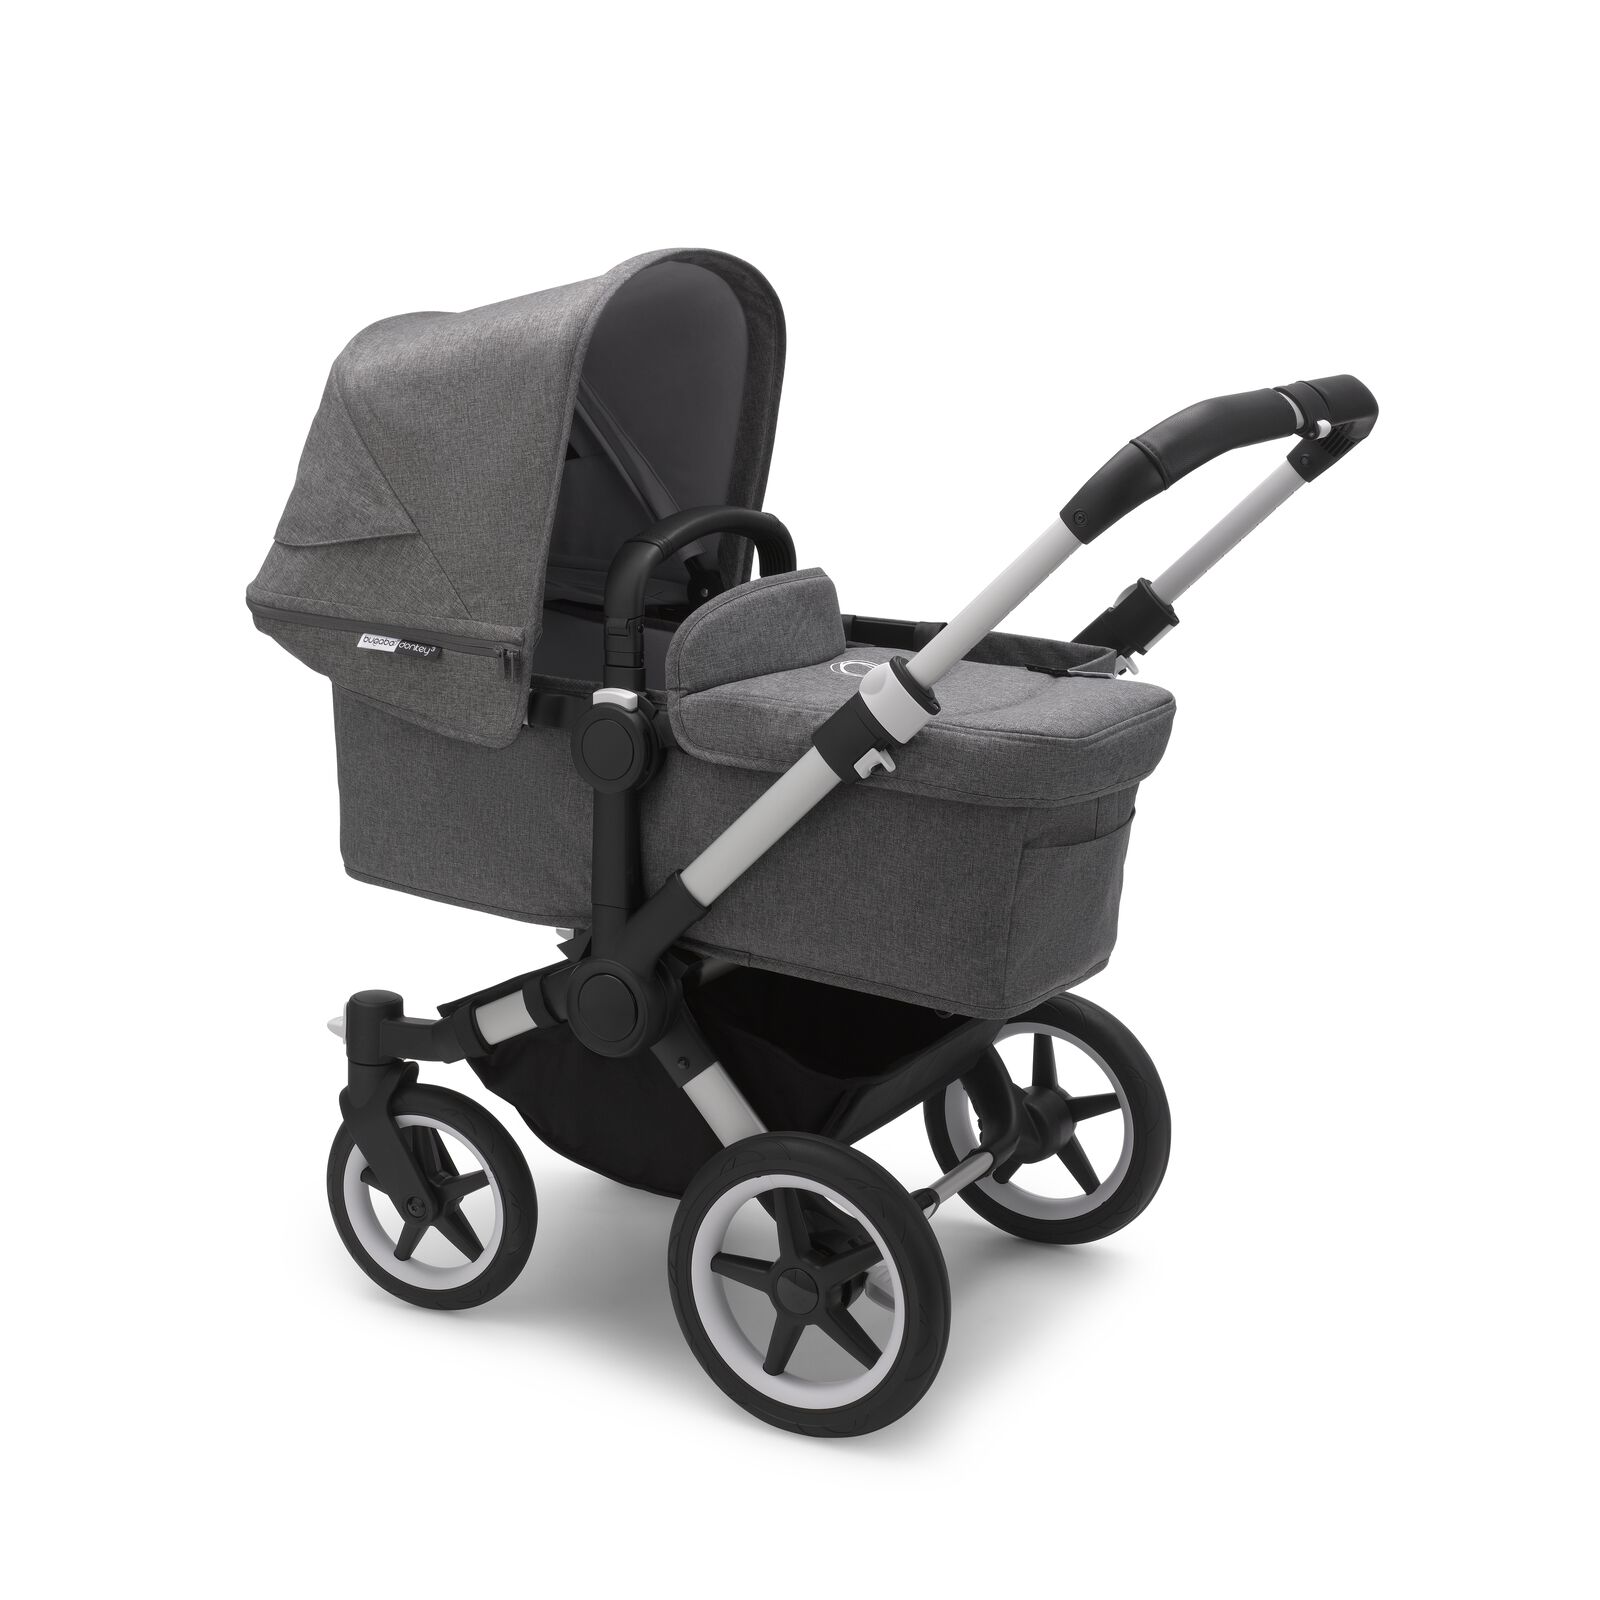 Bugaboo Donkey 3 mono carrycot and seat pushchair - View 2